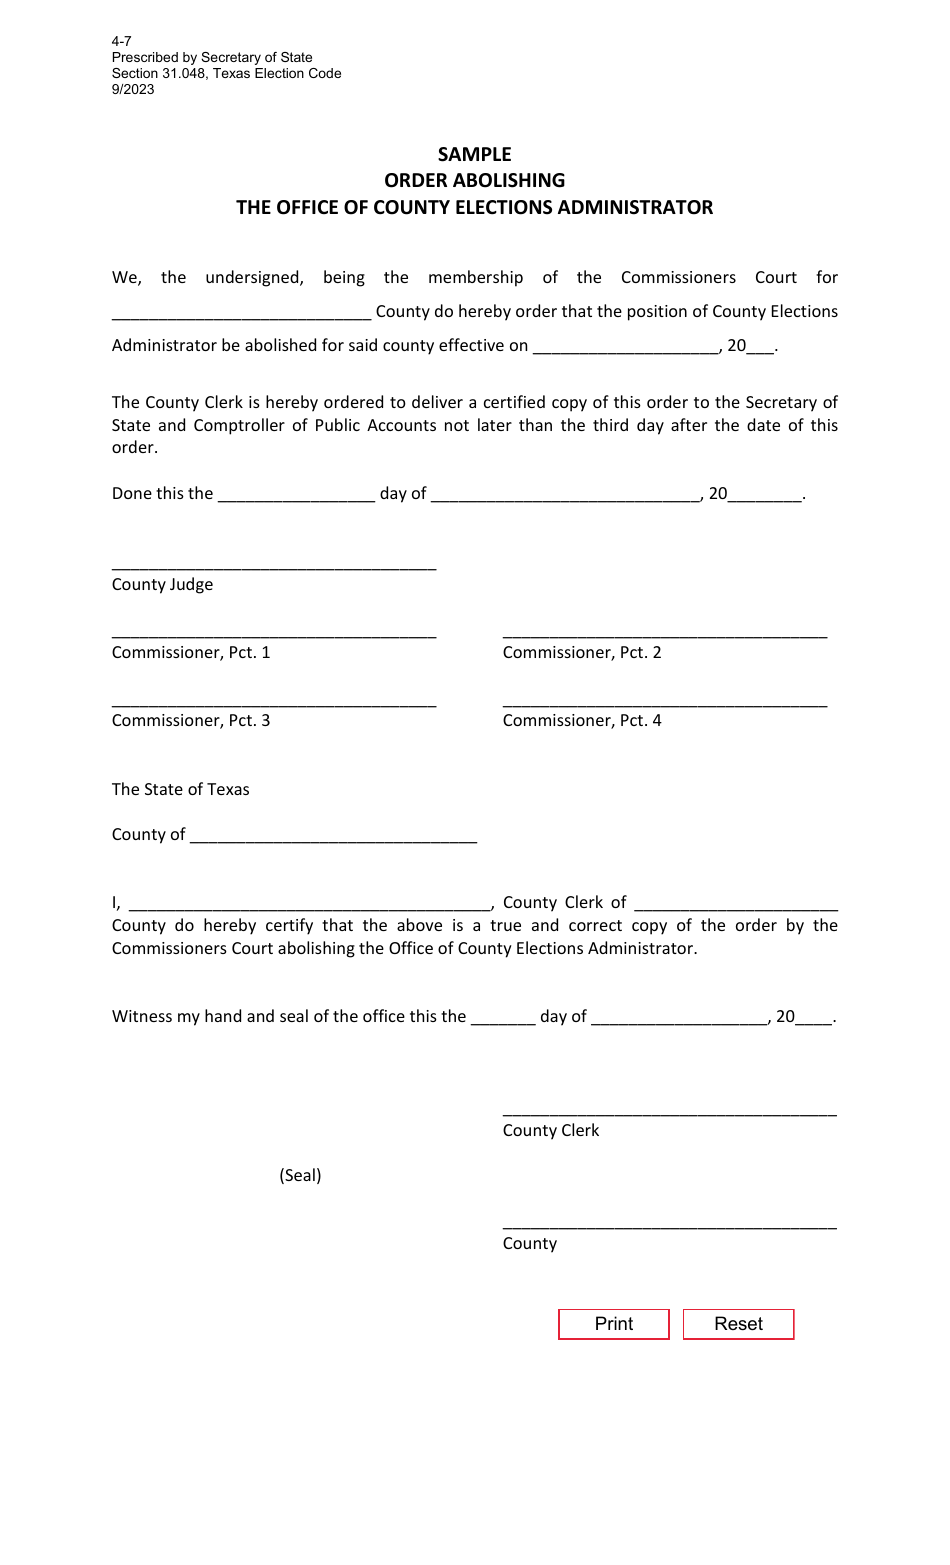 Form 4-7 Order Abolishing the Office of County Elections Administrator - Texas, Page 1